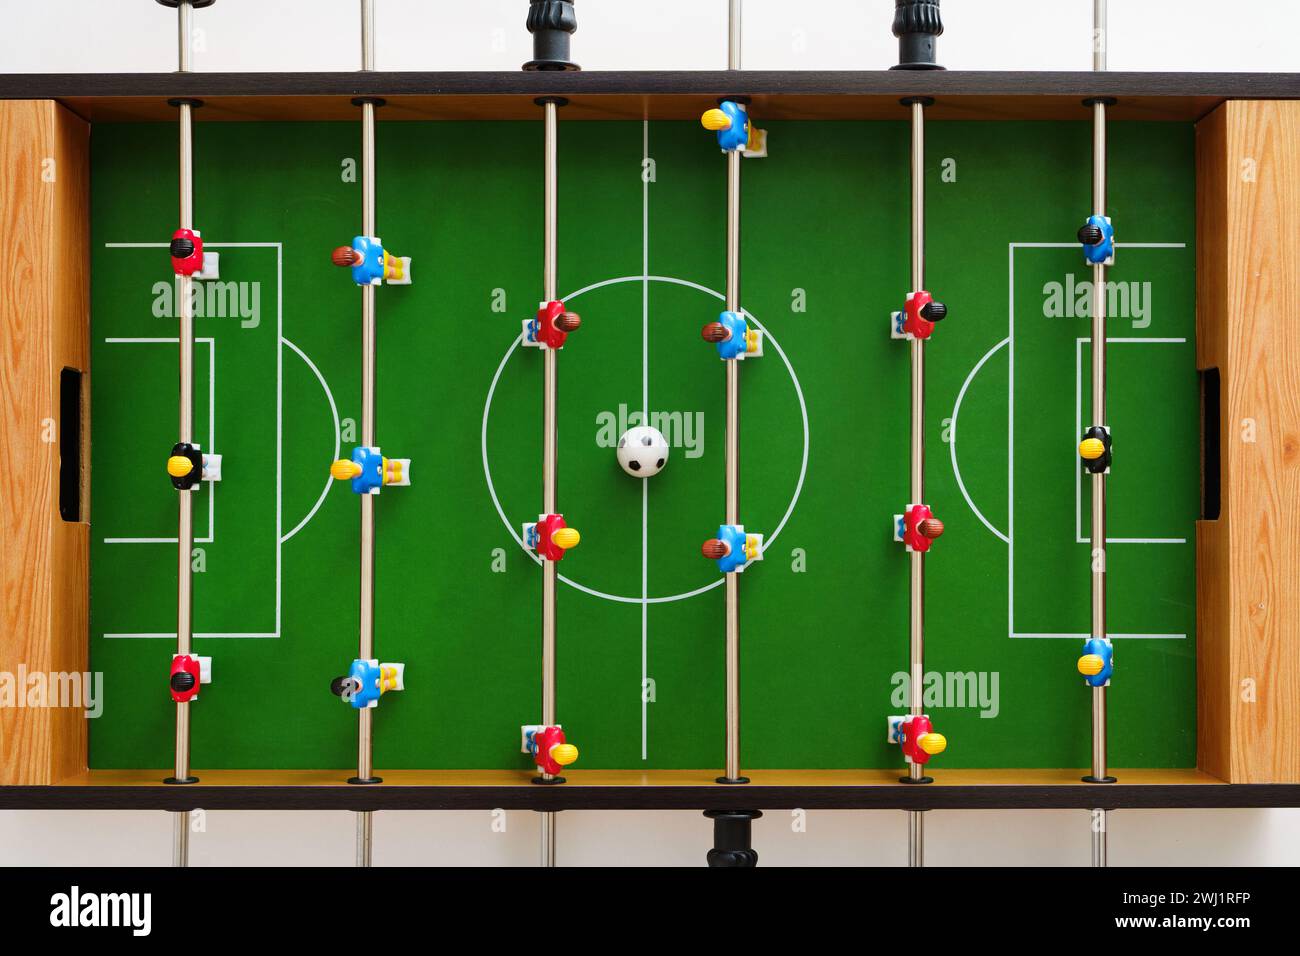 Top view of a table football game in progress Stock Photo